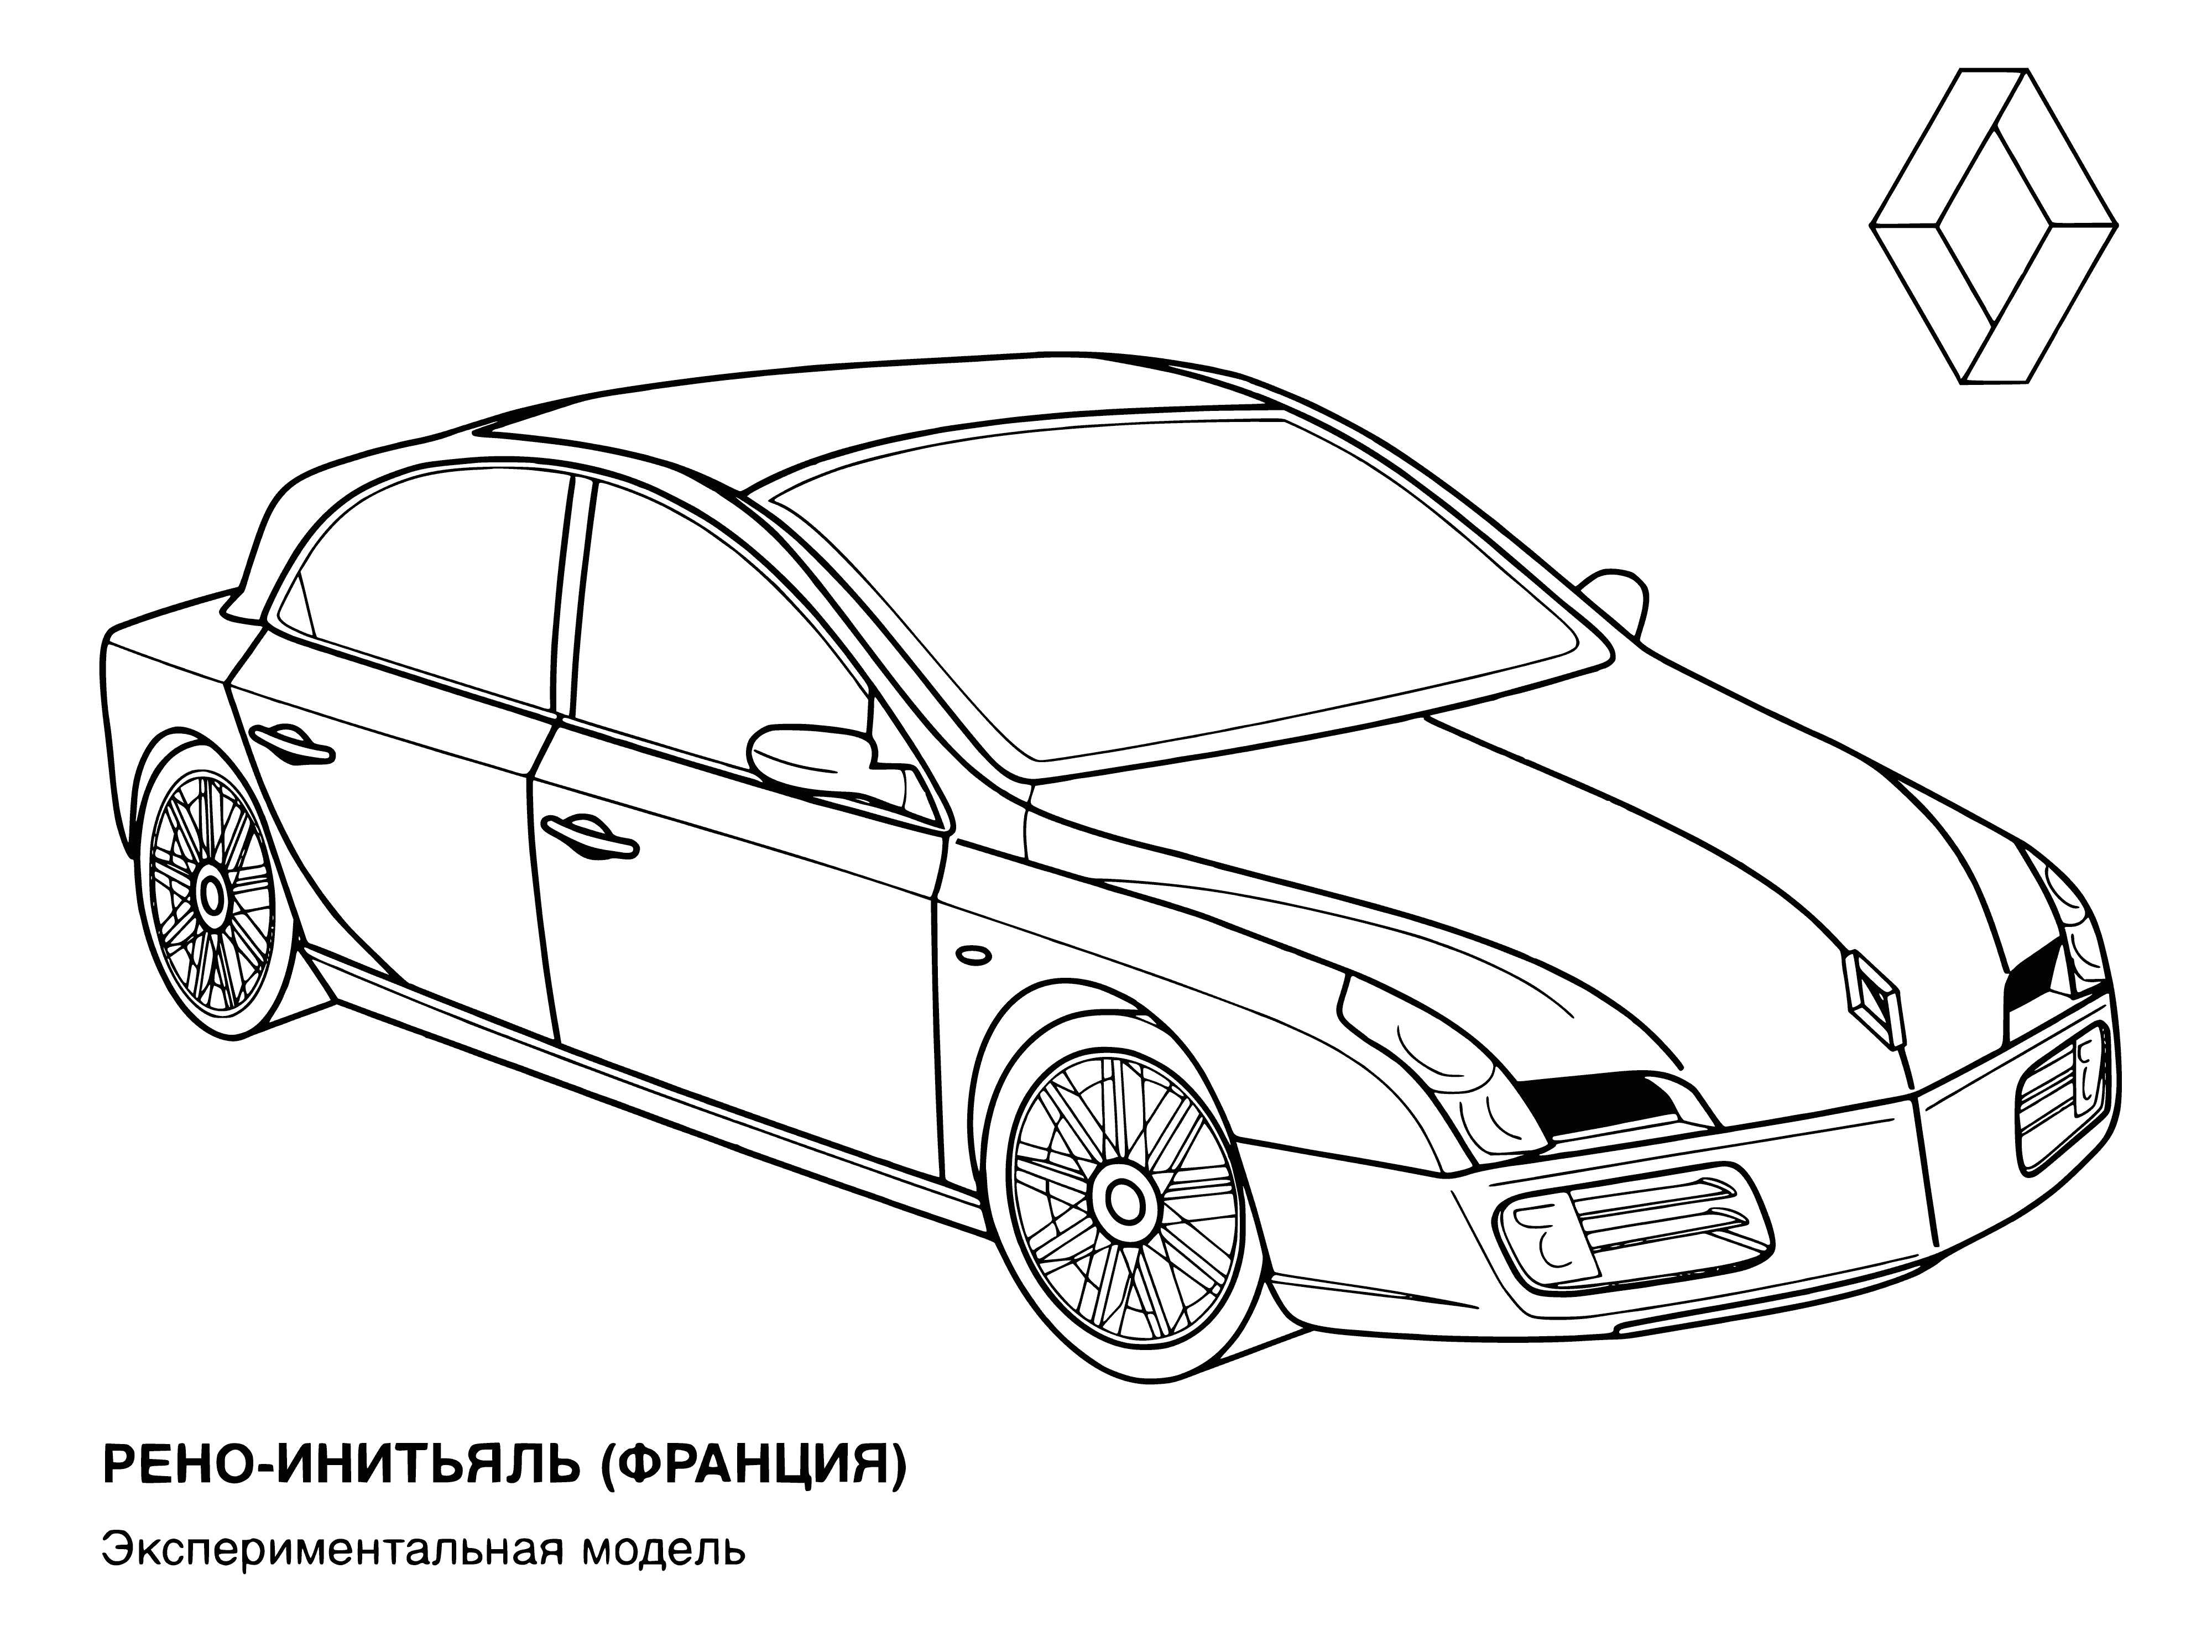 coloring page: Reno (France): Wide selection of new cars, variety of makes & models, competitive prices, experienced sales staff to help find perfect car.